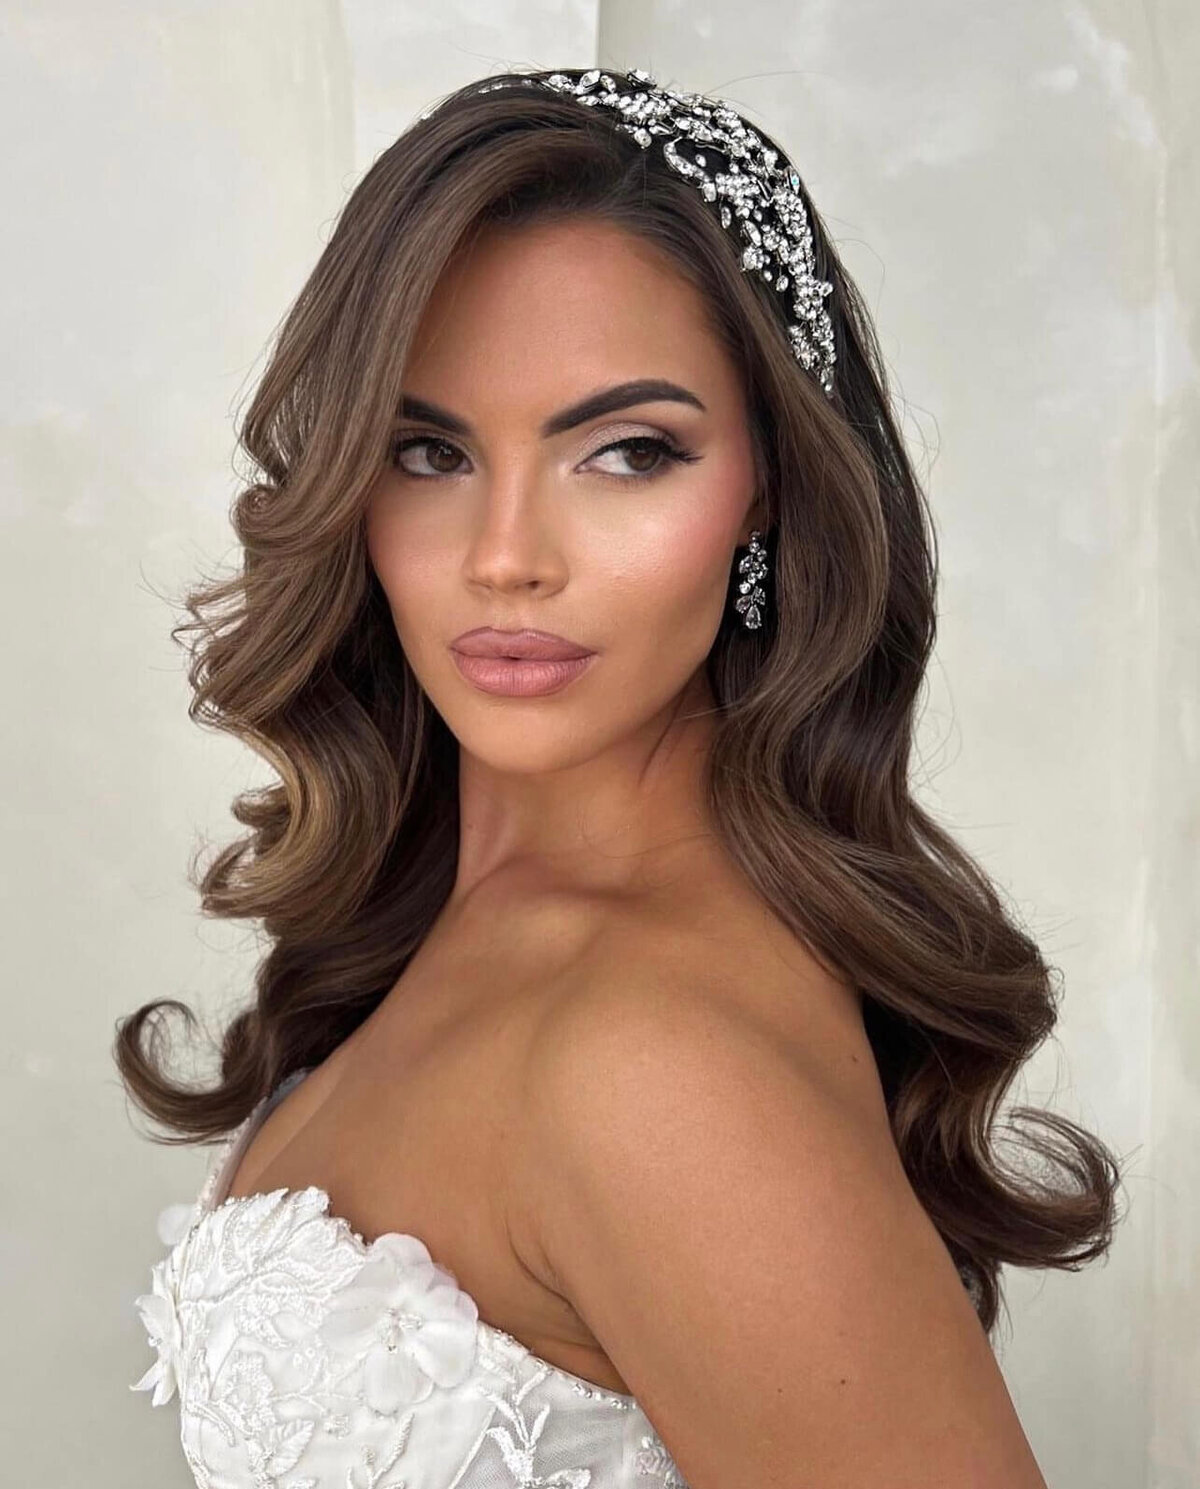 vanessa-andrea-beauty-and-co-luxury-bridal-hair-makeup-home-04